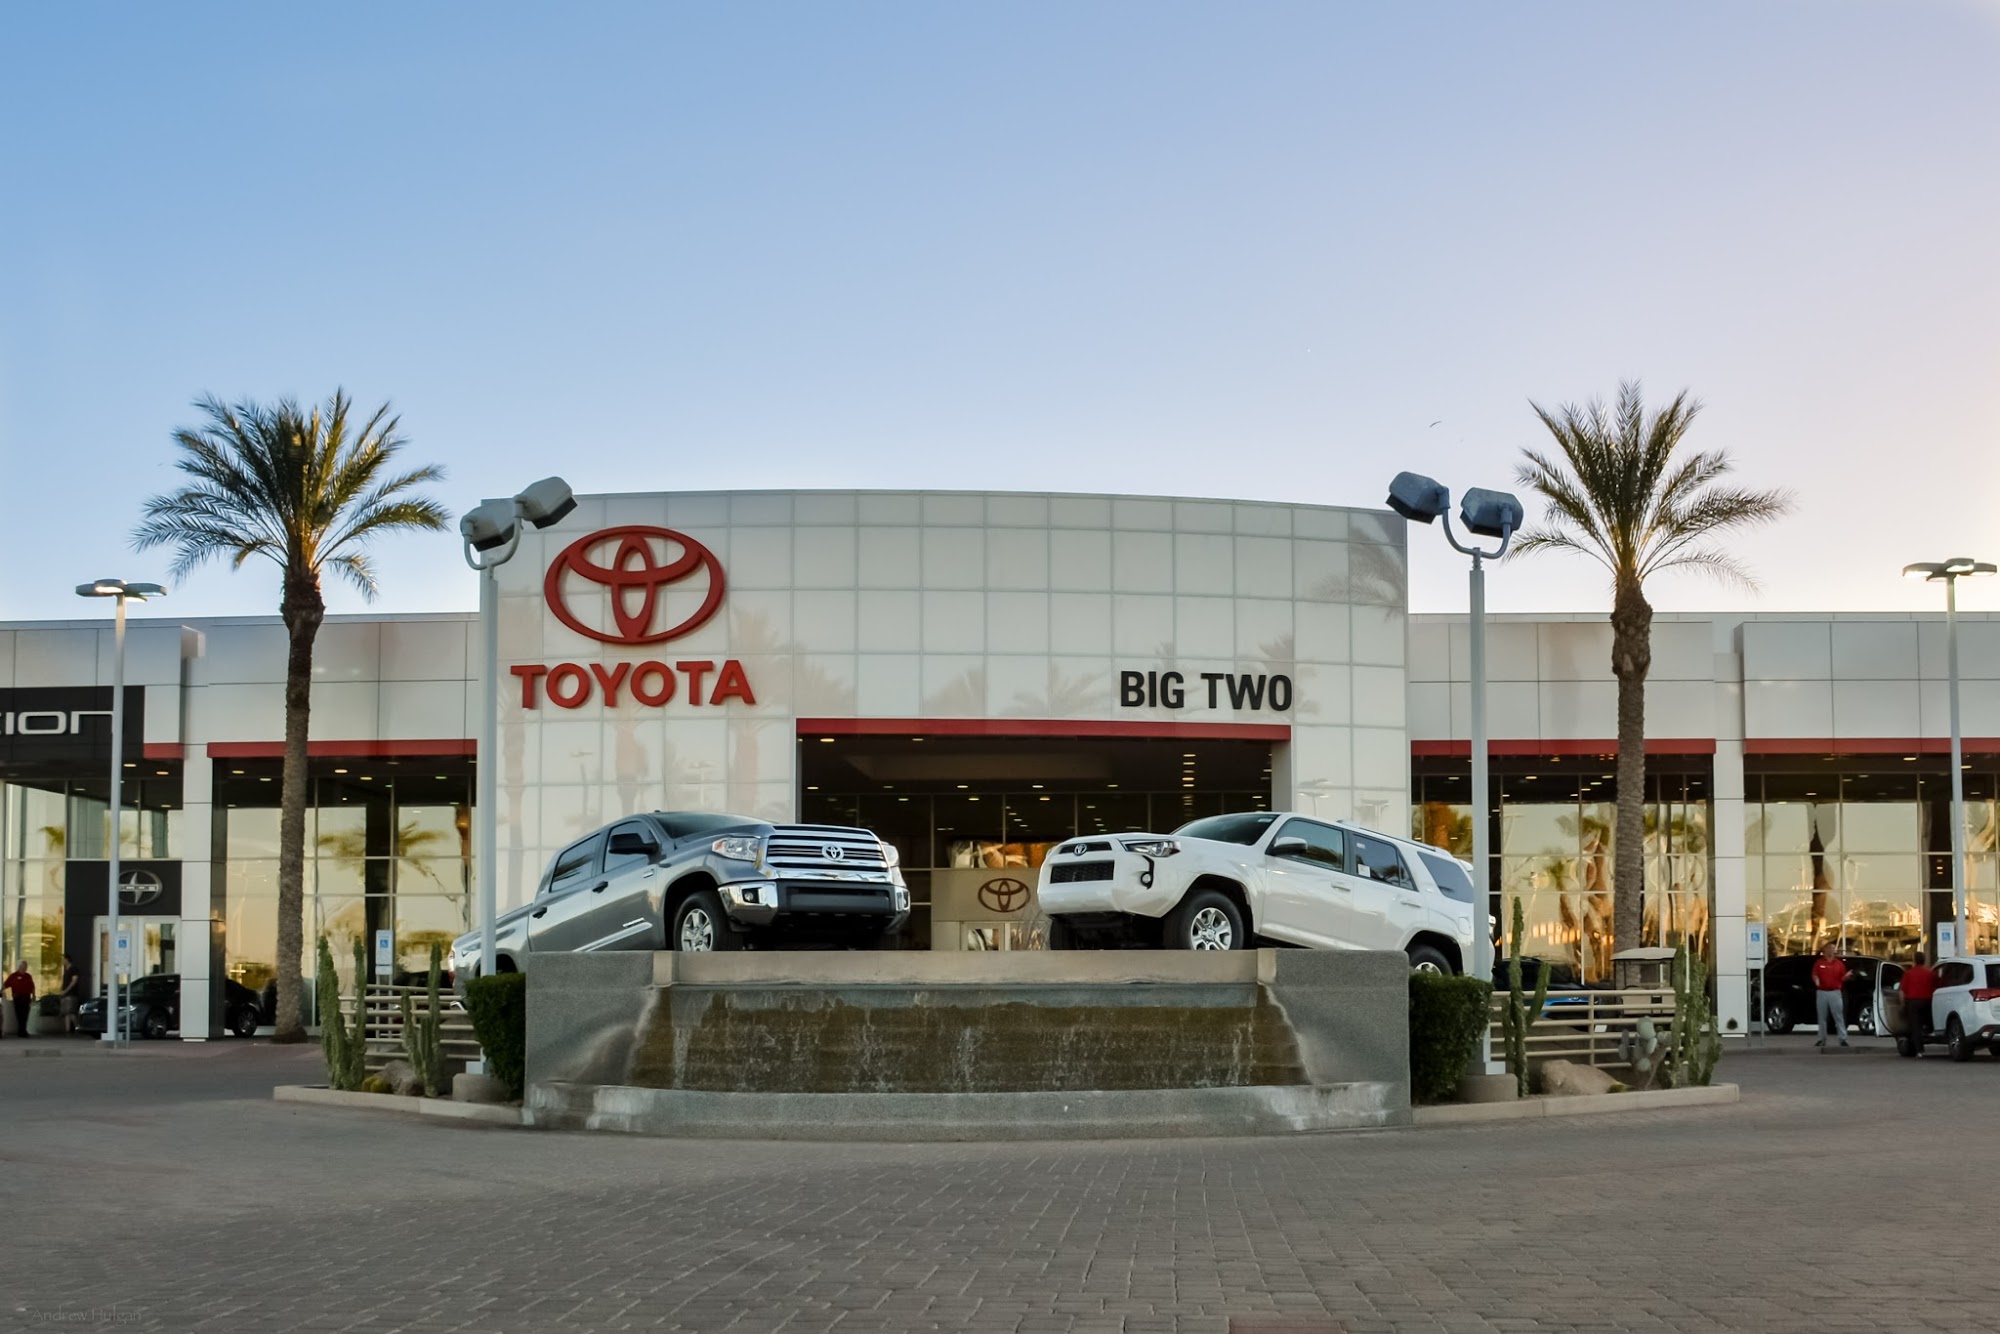 Big Two Toyota of Chandler